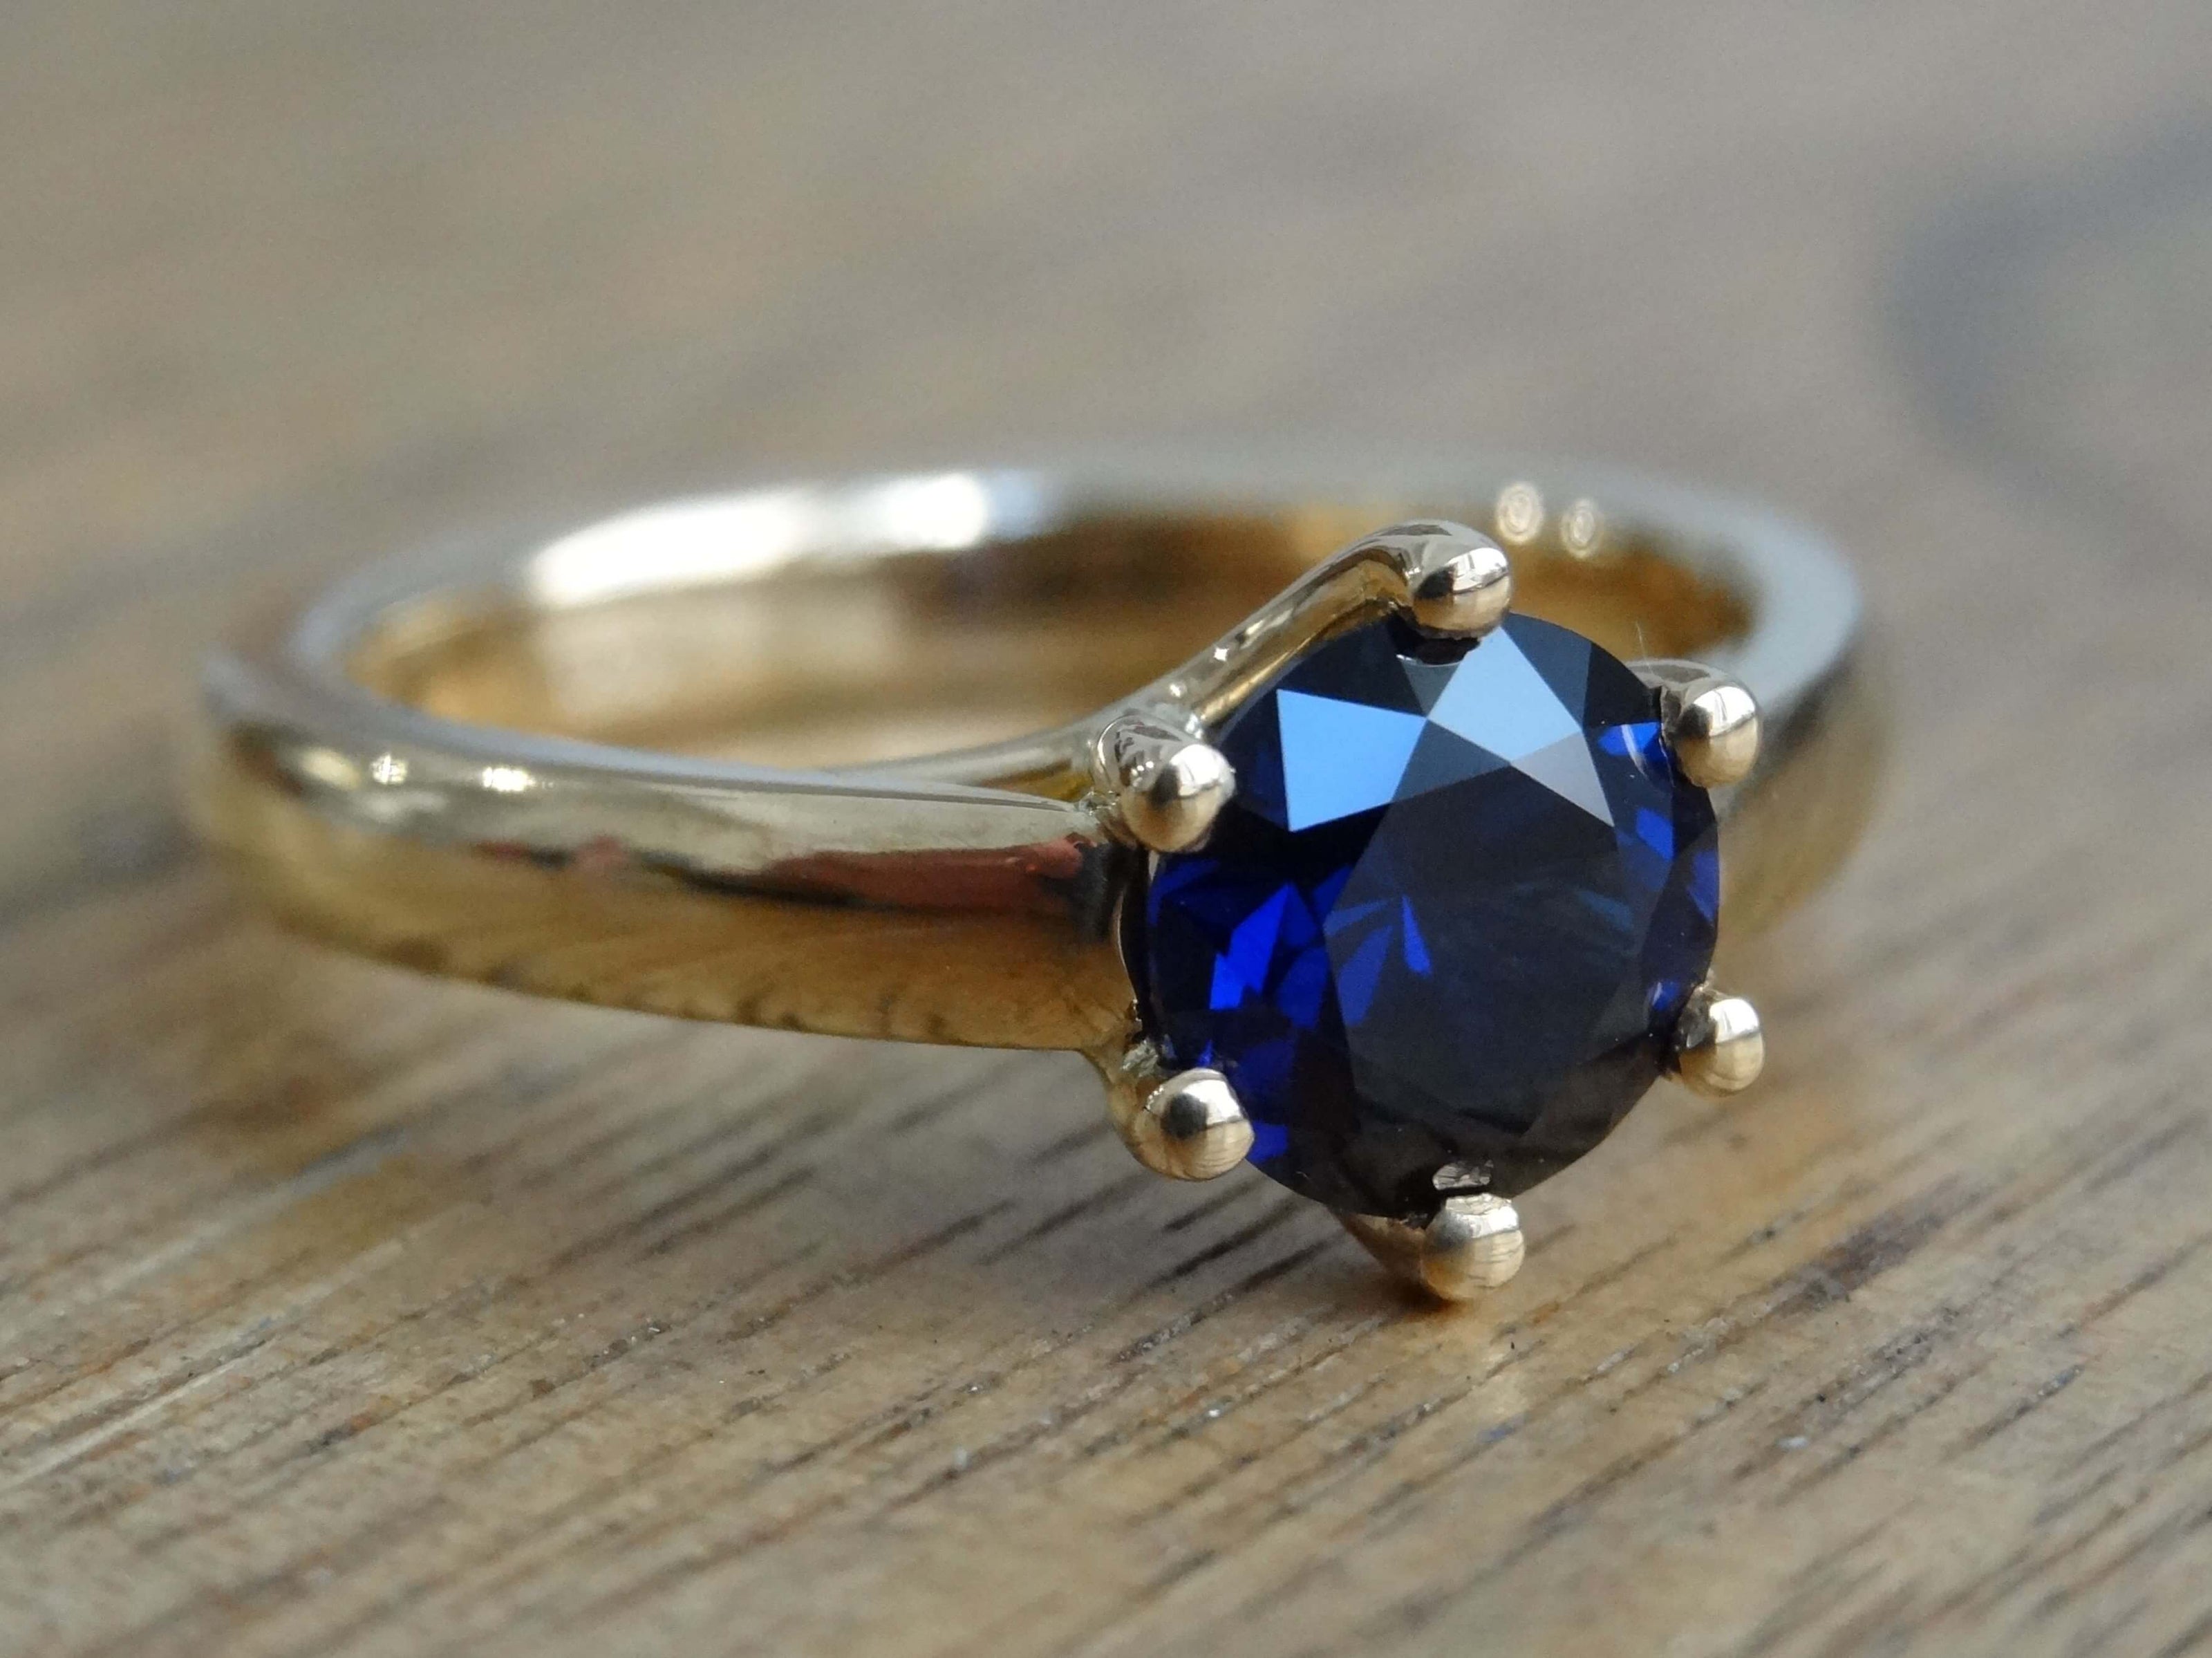 18ct yellow gold 6 claw engagement ring set with one round bright blue sapphire on a wooden surface 